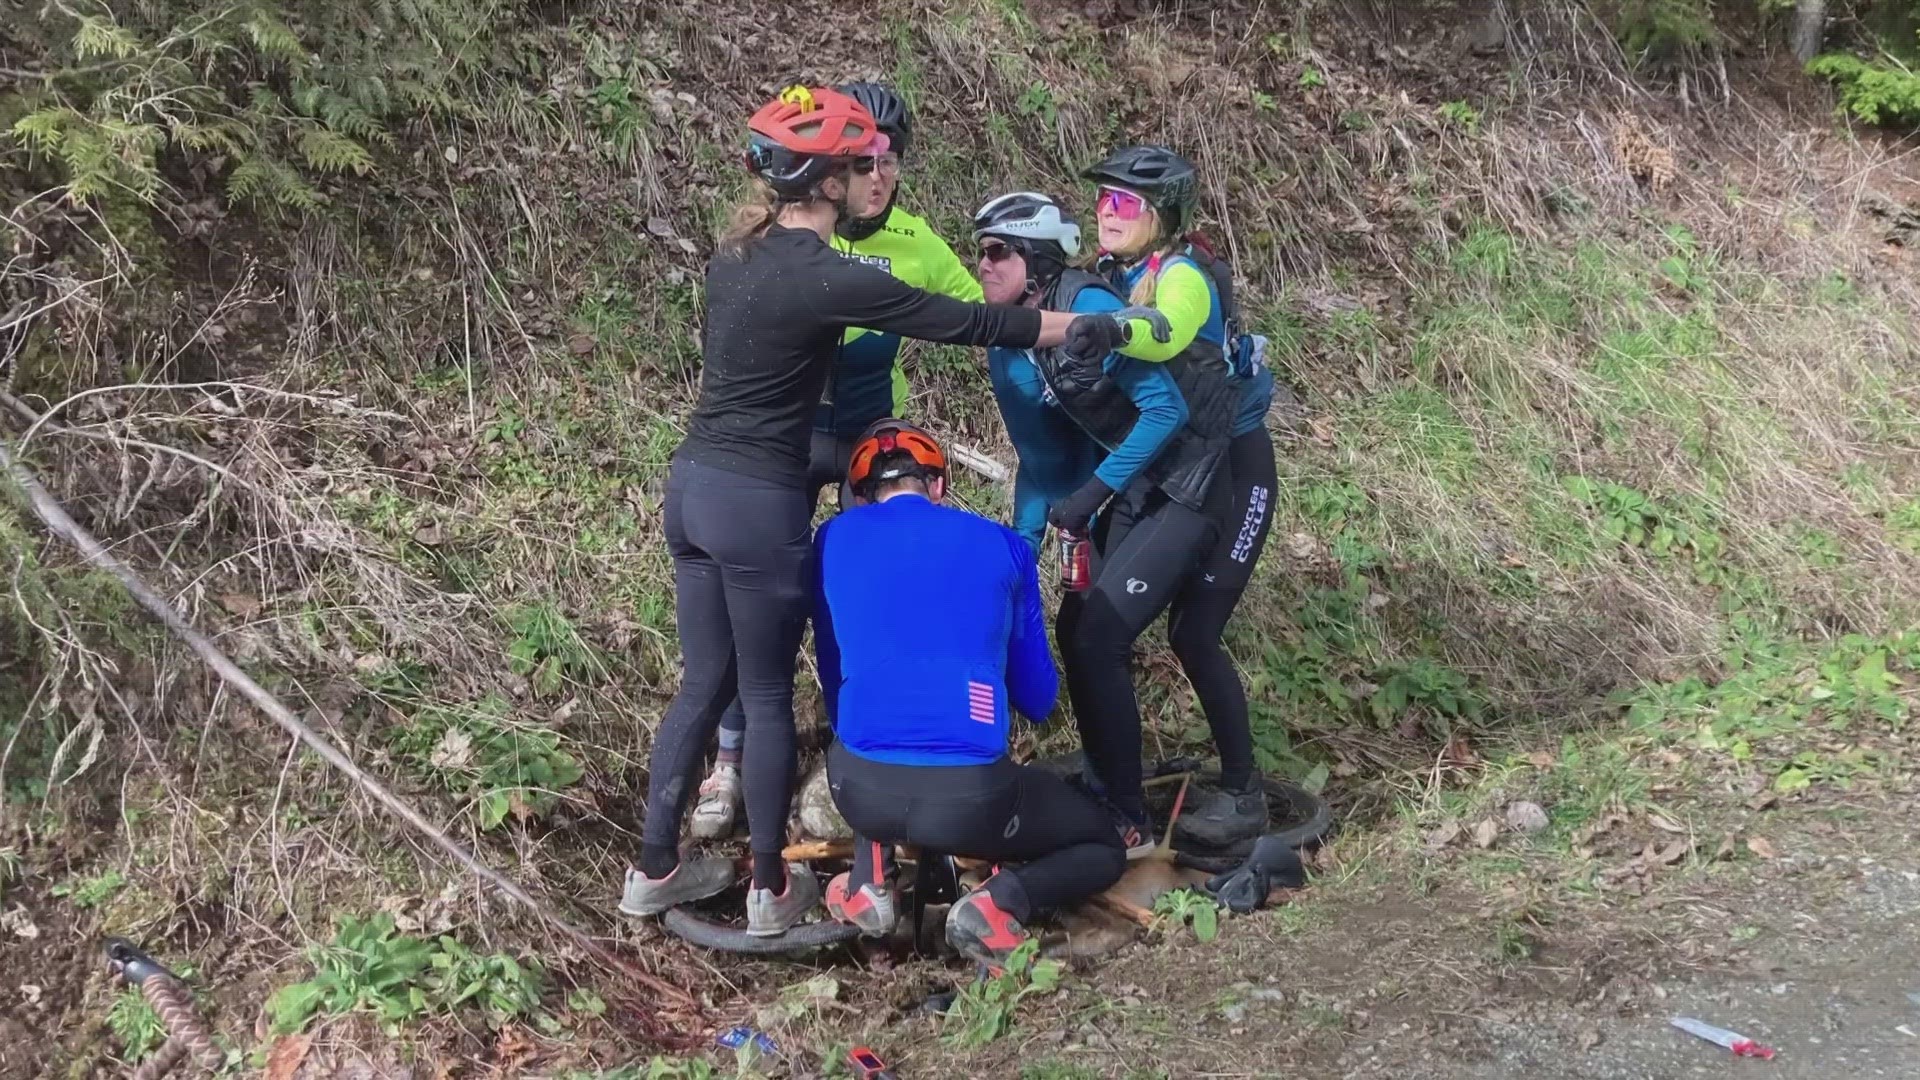 The group of cyclists, who were attacked on Feb. 17 near Snoqualmie, are sharing details of the incident that had them fighting for their lives.